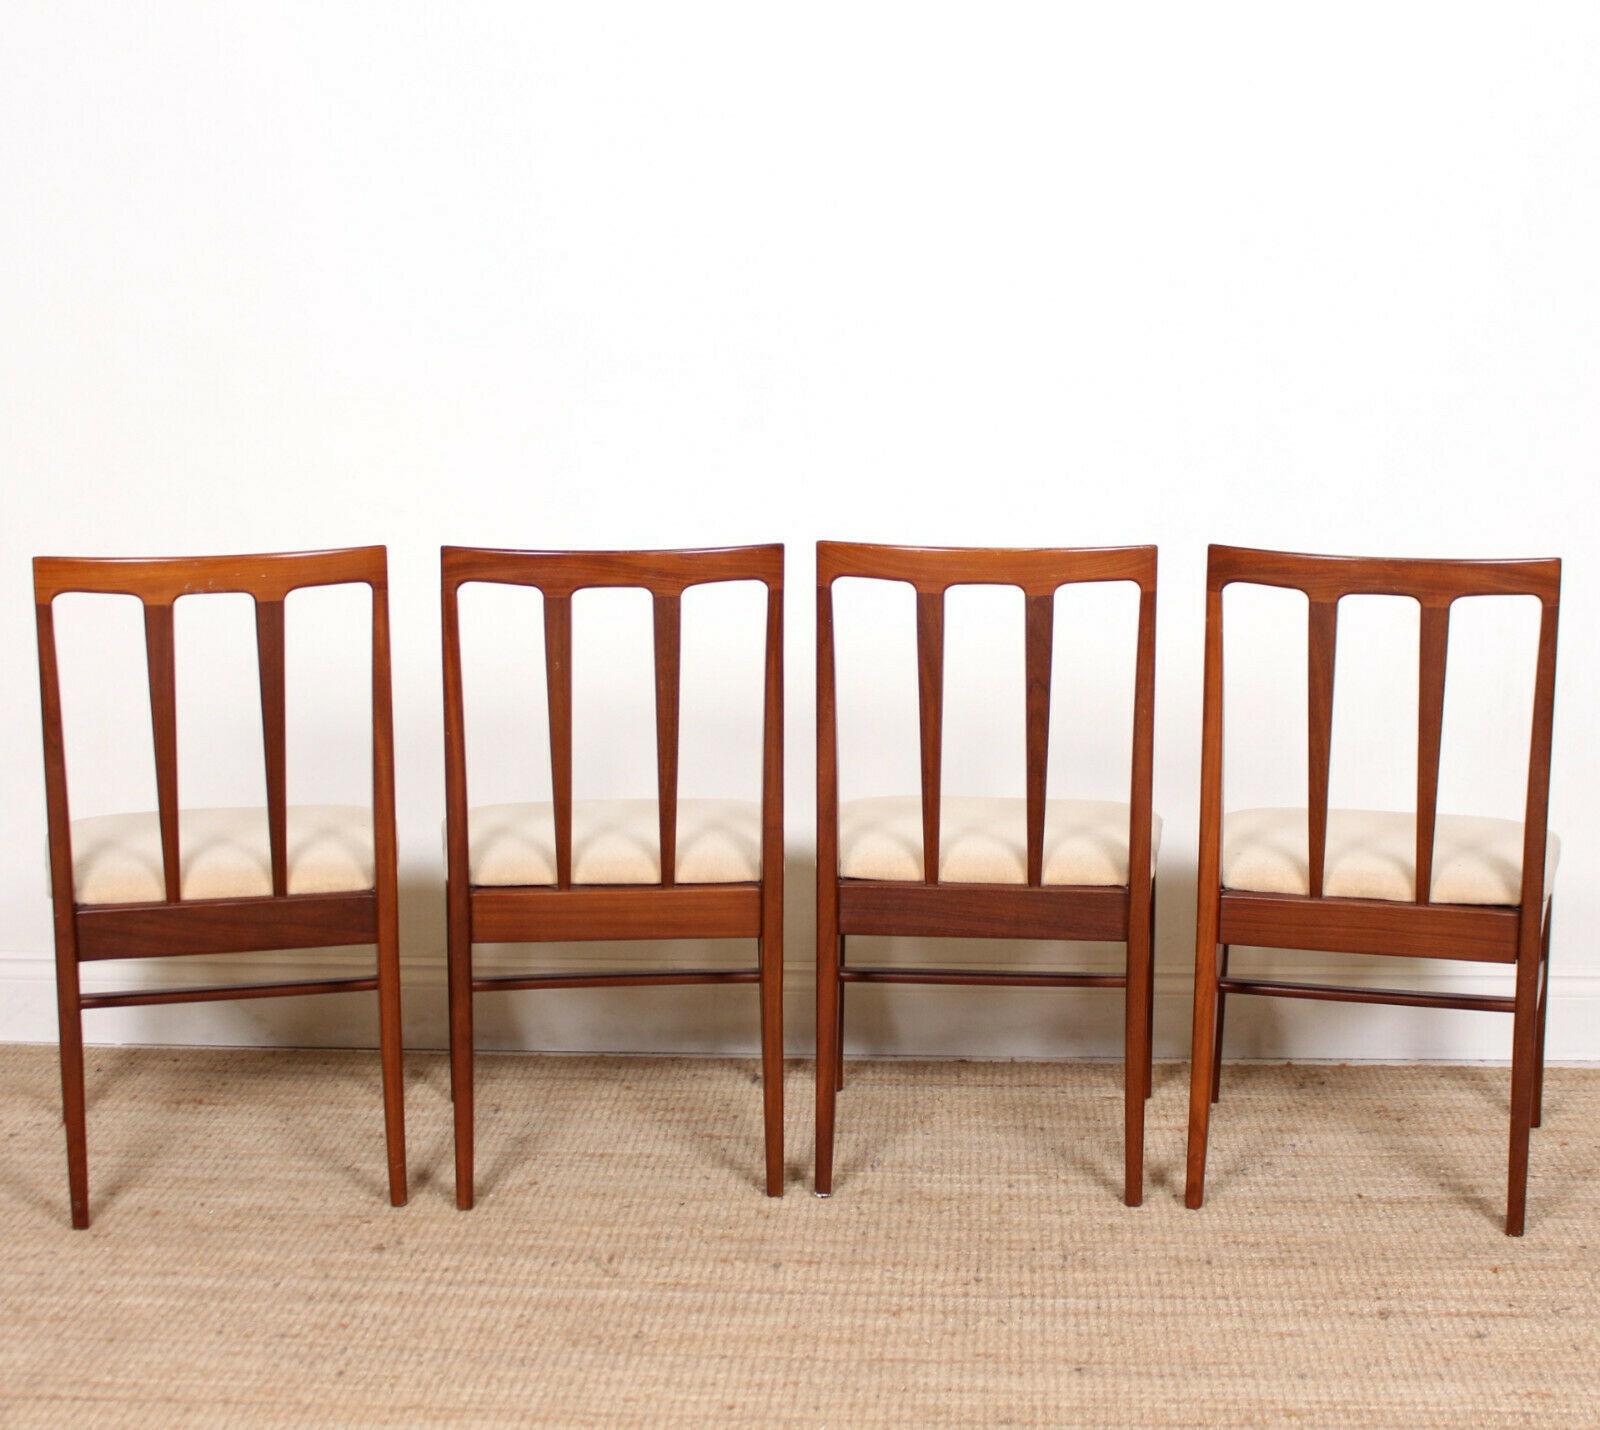 Danish Teak Dining Table and Chairs Mid-Century Modern 4 Chairs 4